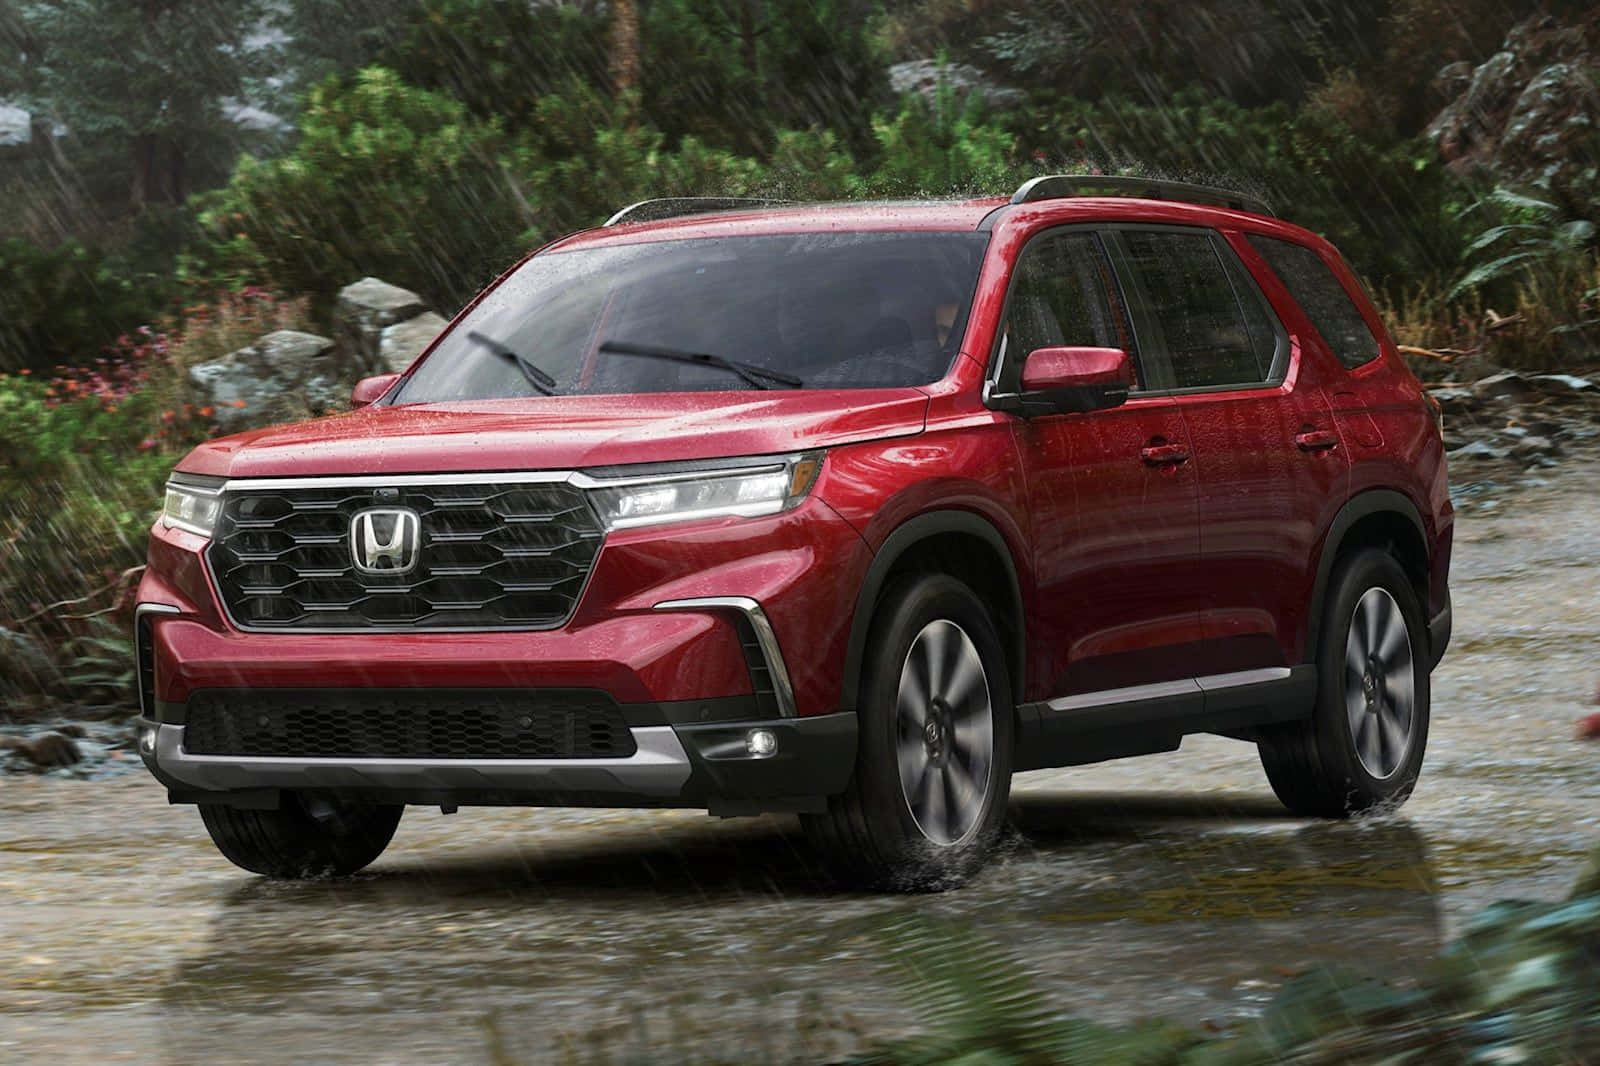 The Red 2020 Honda Pilot Is Driving Through The Forest